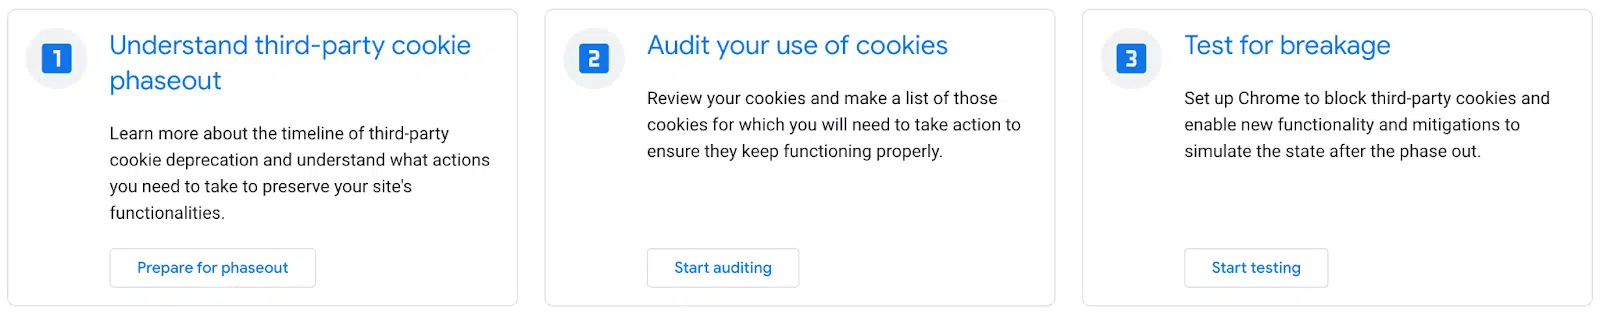 Google's guide to preparing for third-party cookie restrictions